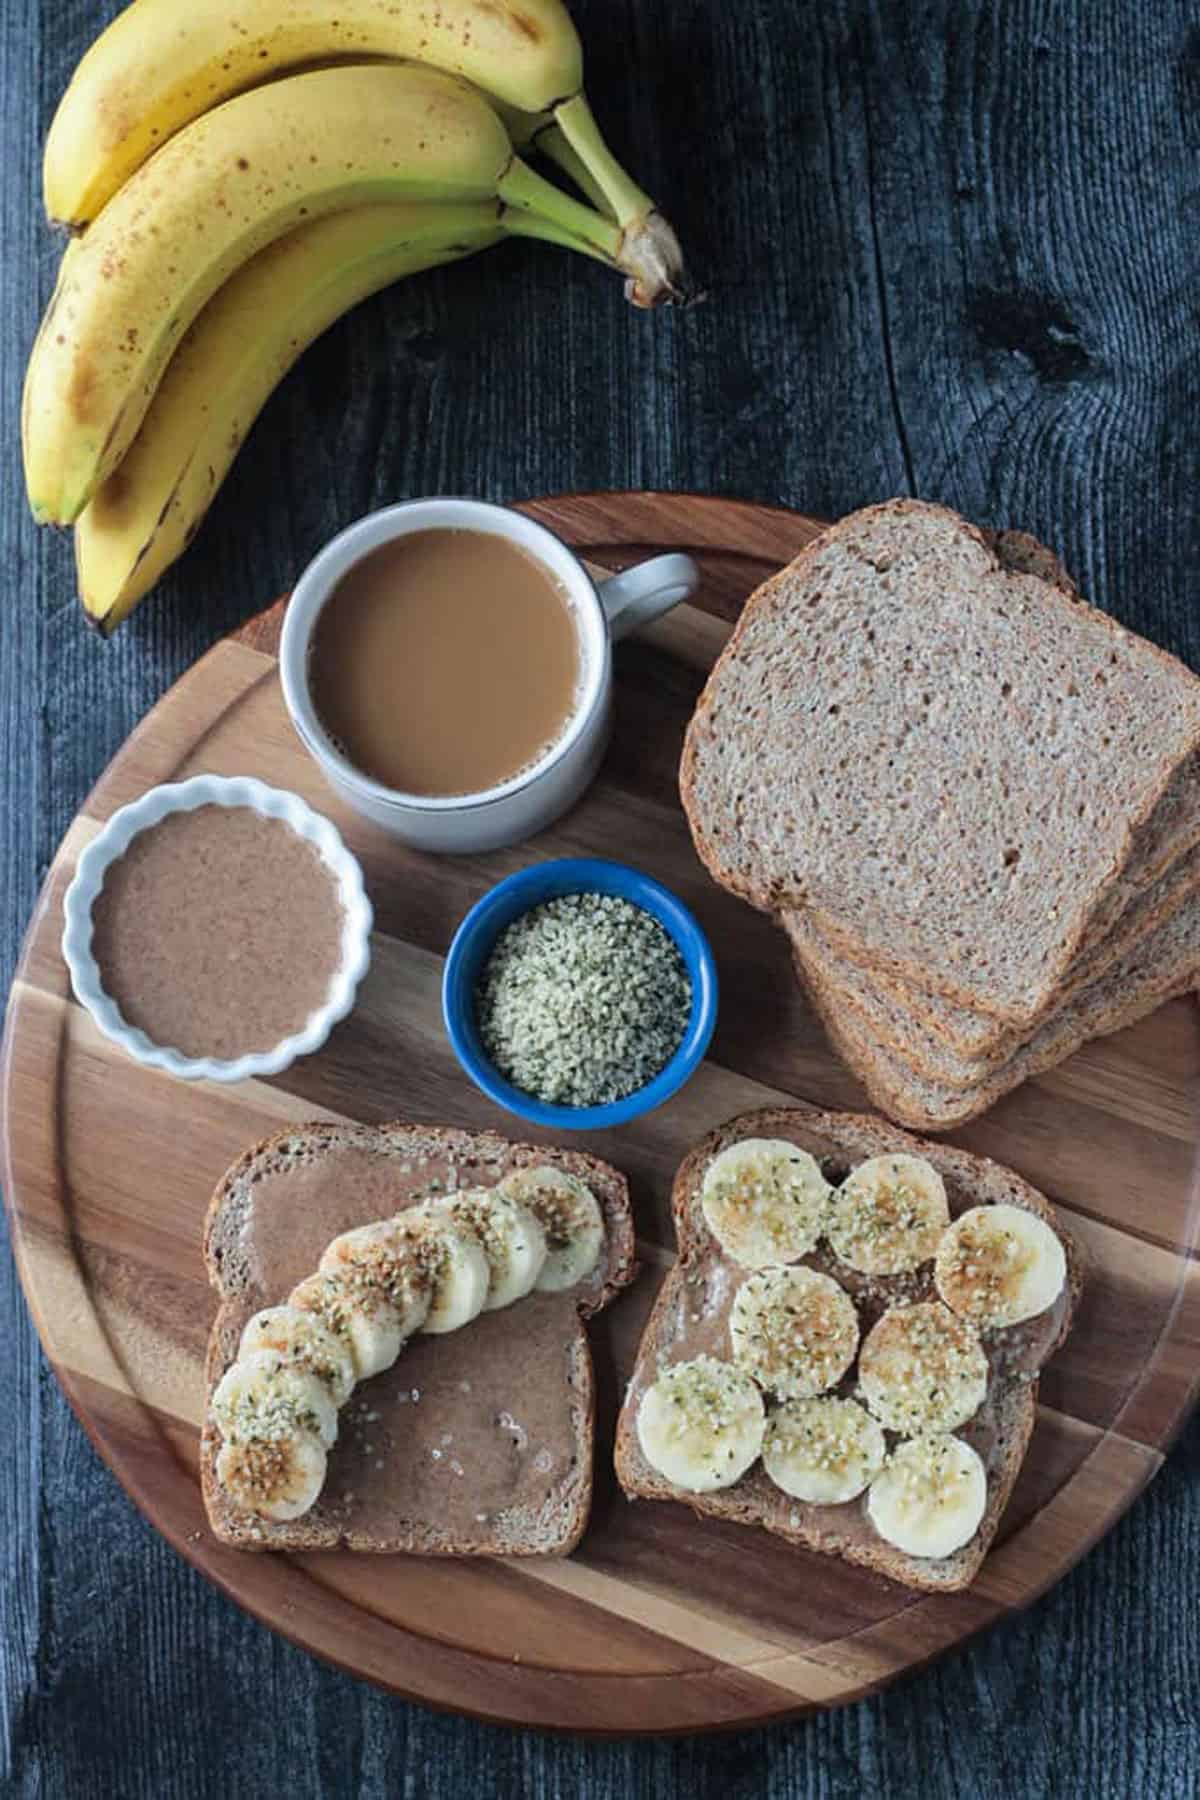 Bread, bananas, hemp seeds, coffee, and almond butter all laid out on a wooden platter.